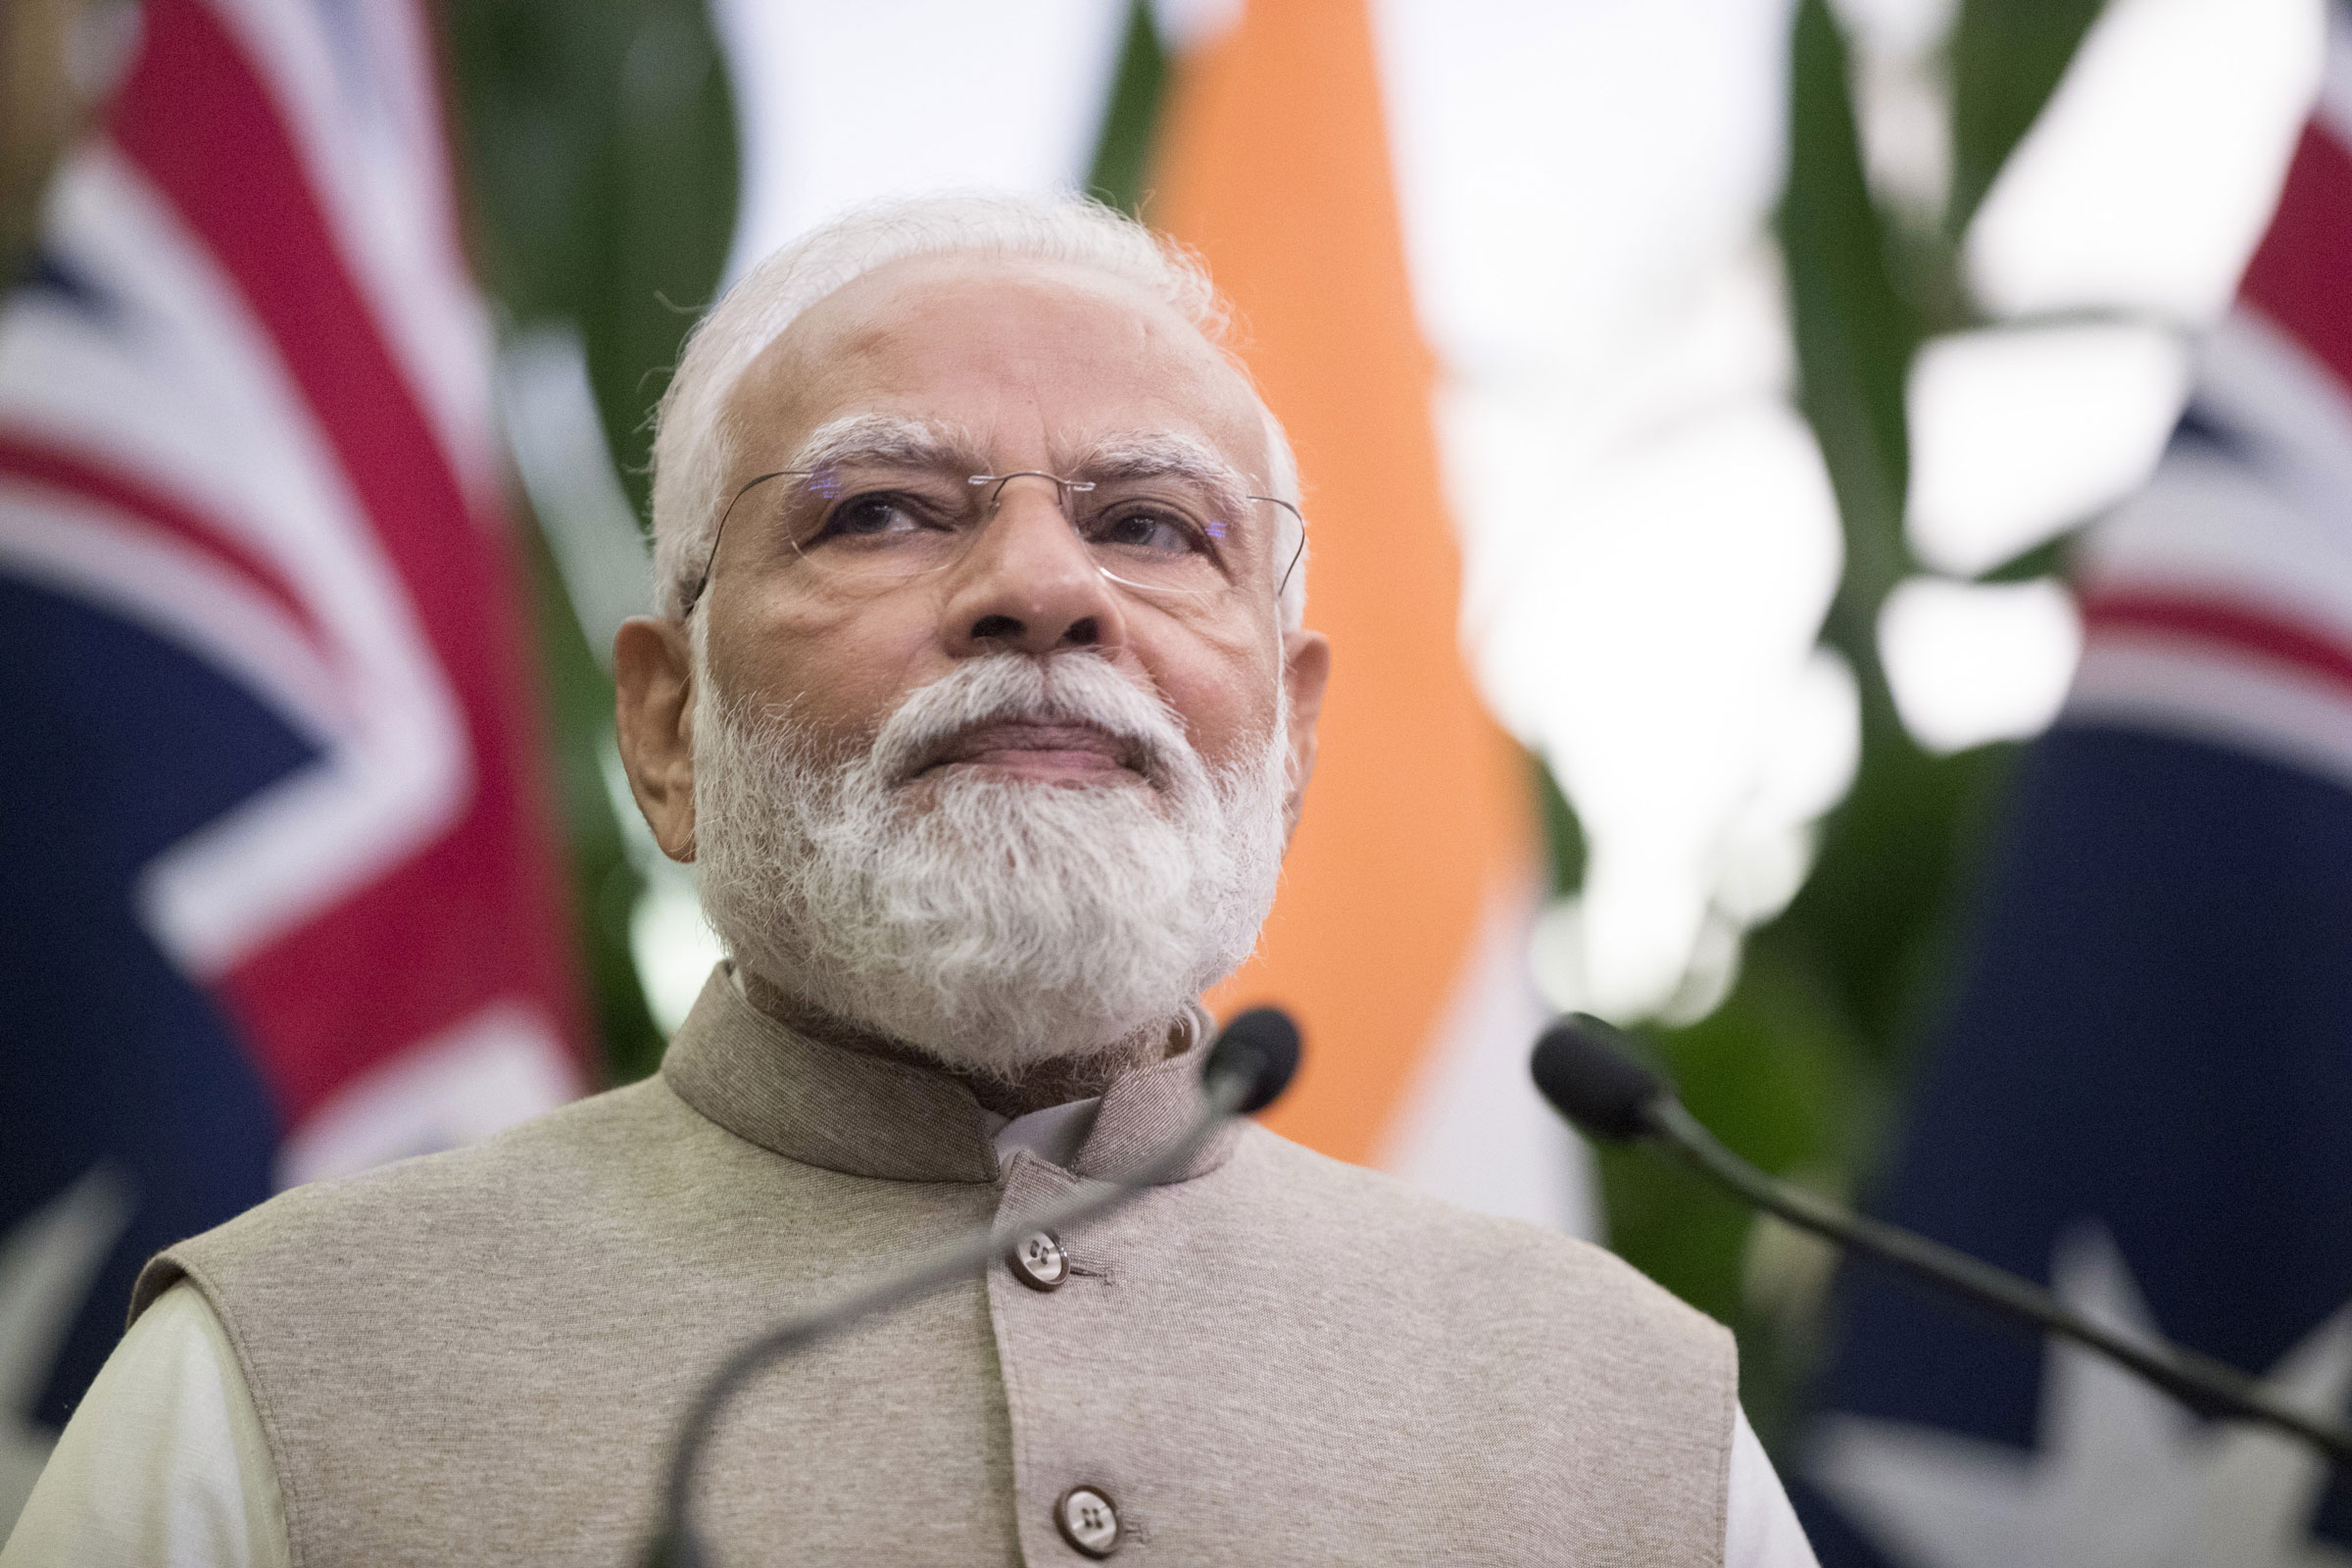 Narendra Modi, India’s prime minister, during a news conference in Sydney, Australia, on May 24, 2023. (Brent Lewin—Bloomberg/Getty Images)